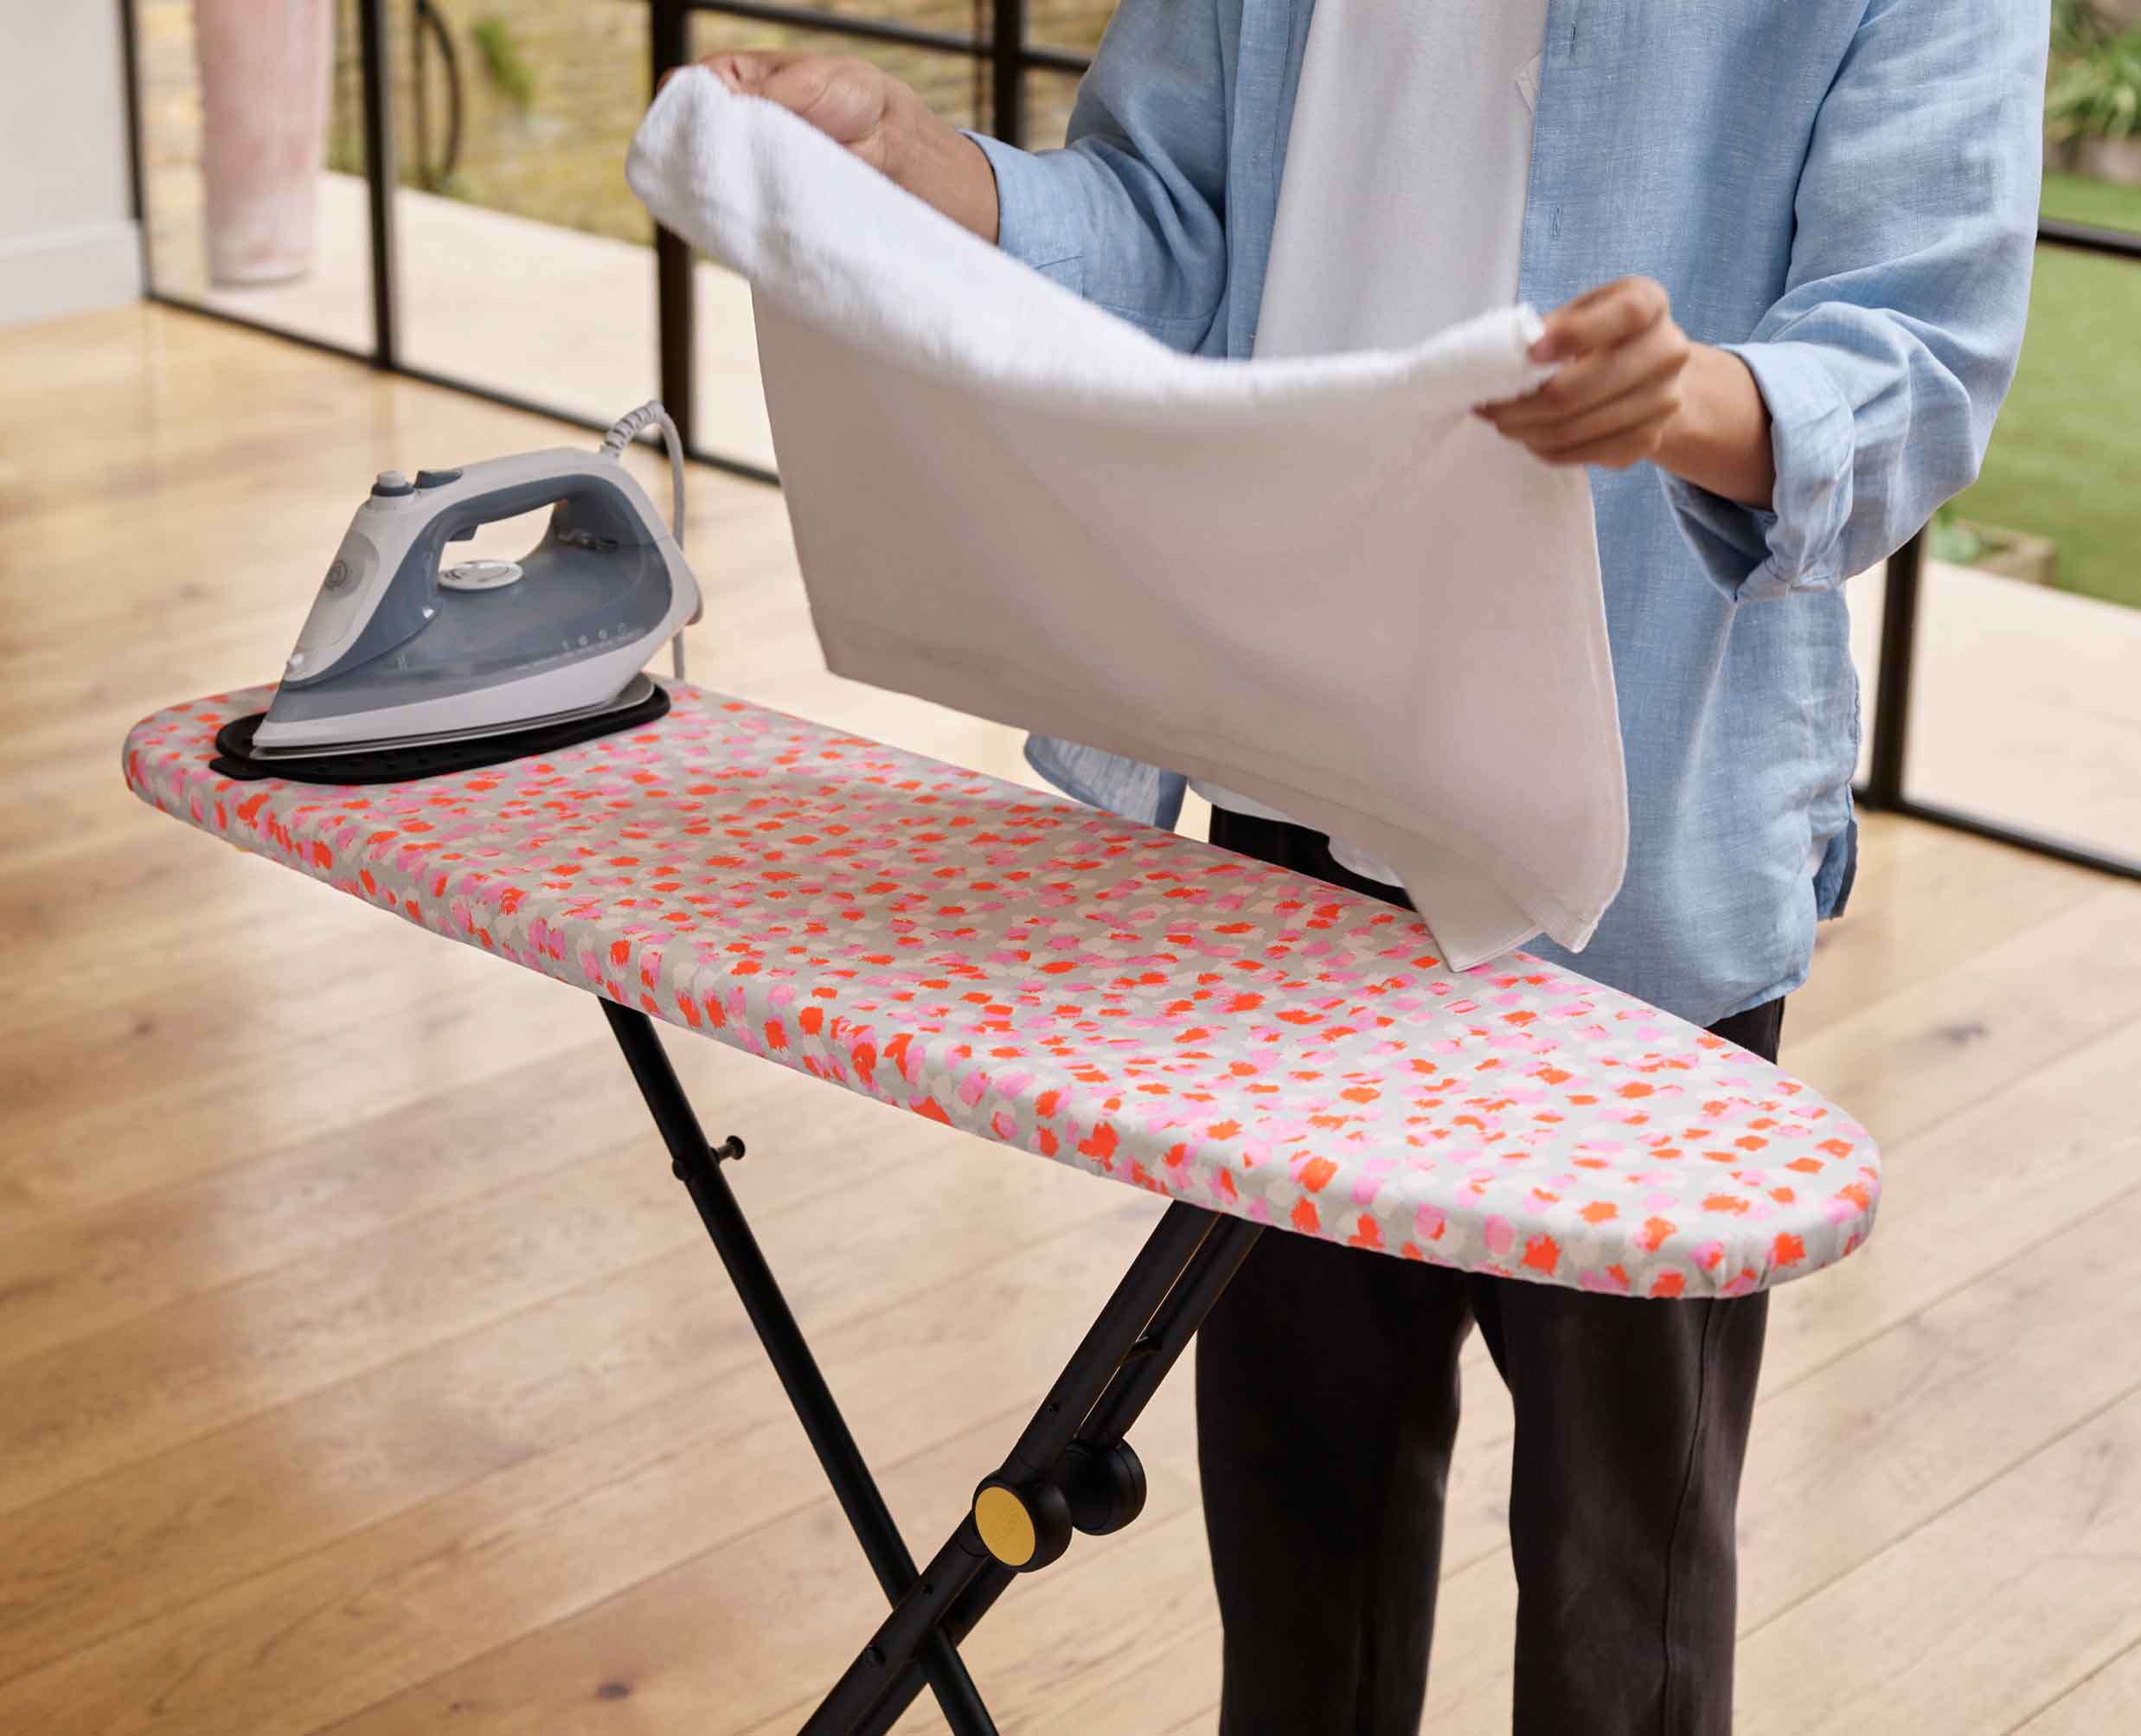 Joseph Joseph Glide Easy-store Ironing Board with Compact Legs | Grey 50005